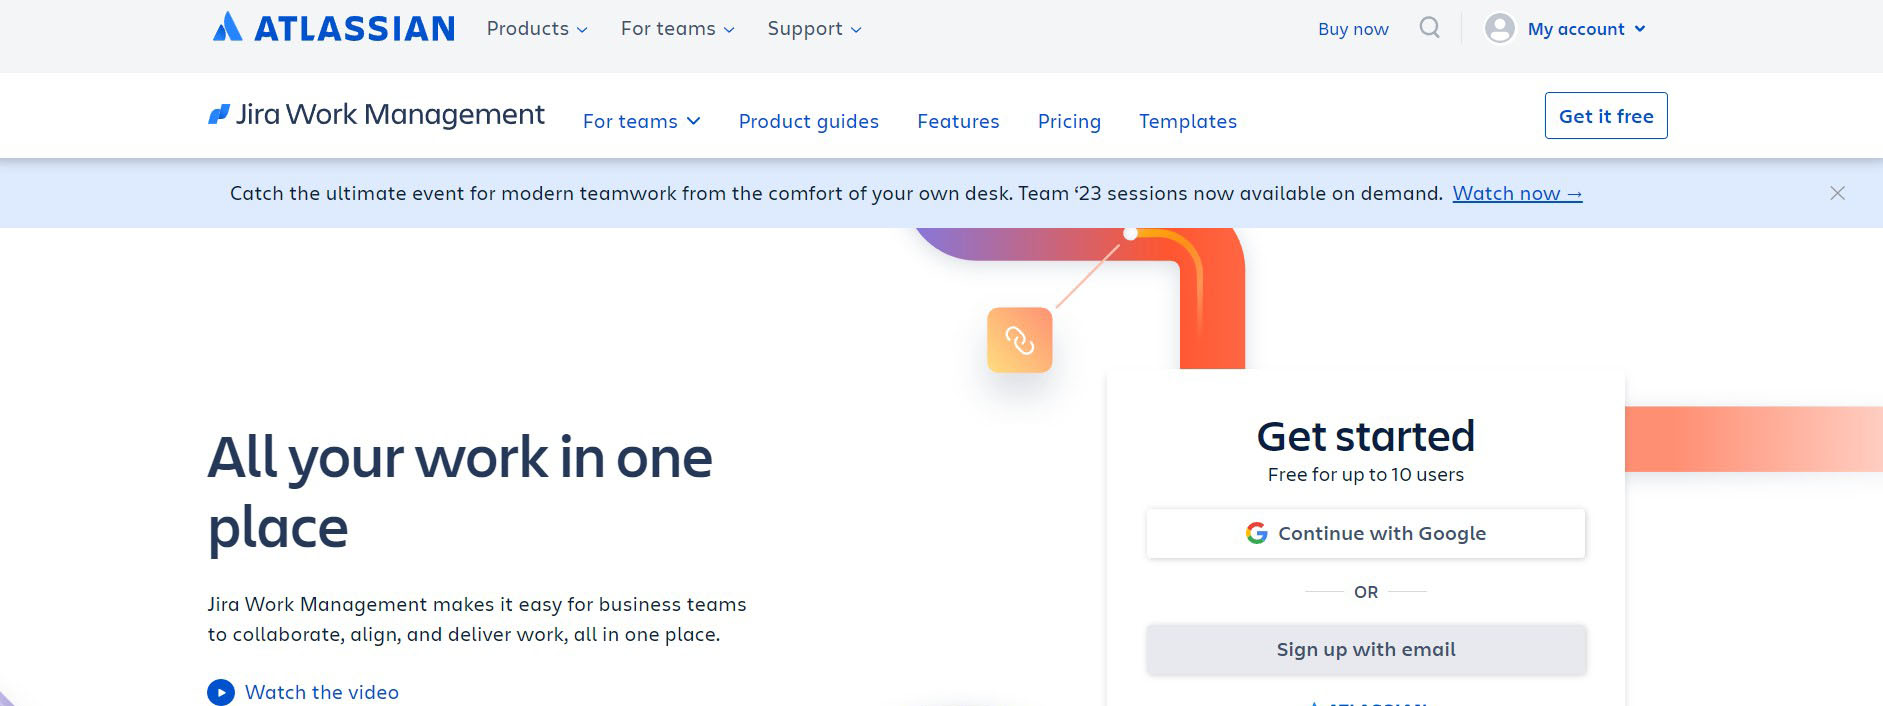 14 Best Product Management Tools for 2023 02